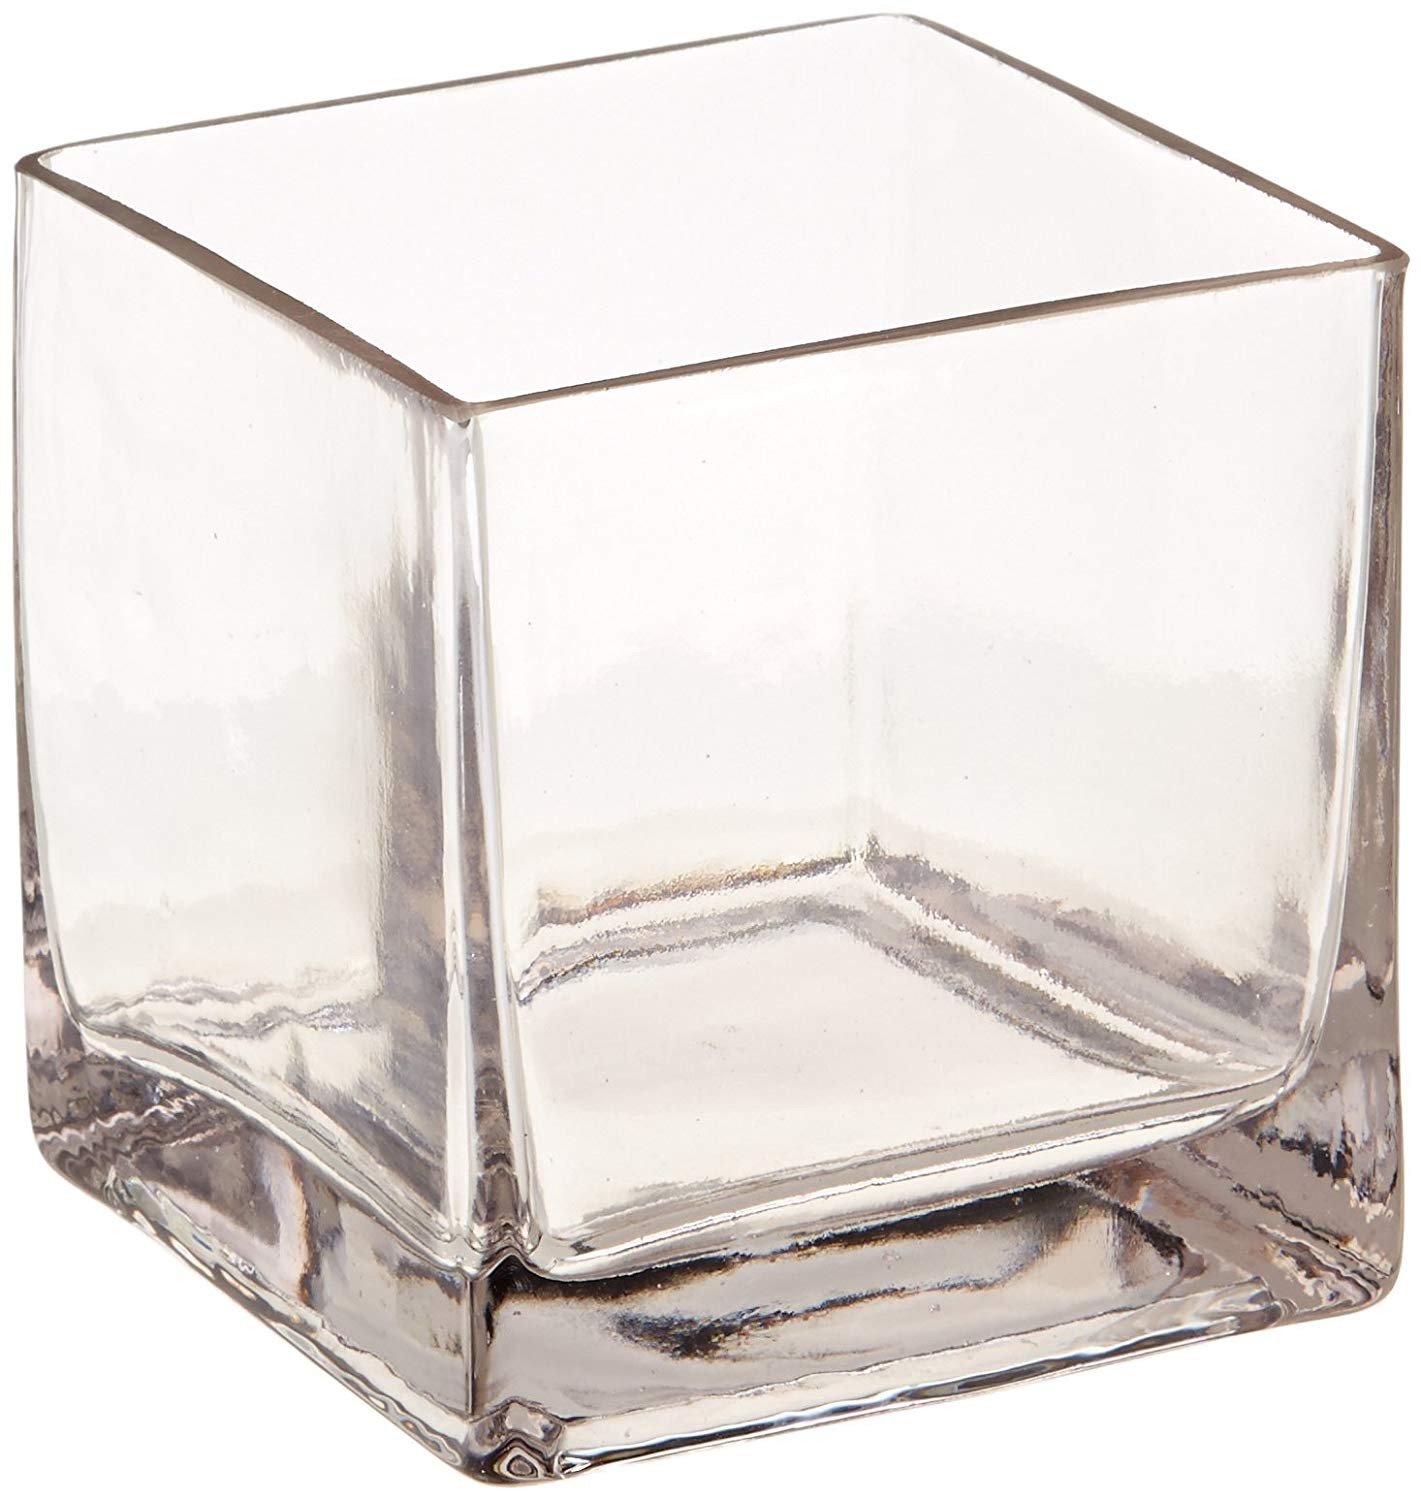 14 Fabulous Glass Cylinder Vase 12 X 5 2022 free download glass cylinder vase 12 x 5 of amazon com 12piece 4 square crystal clear glass vase home kitchen throughout 71 jezfmvnl sl1500